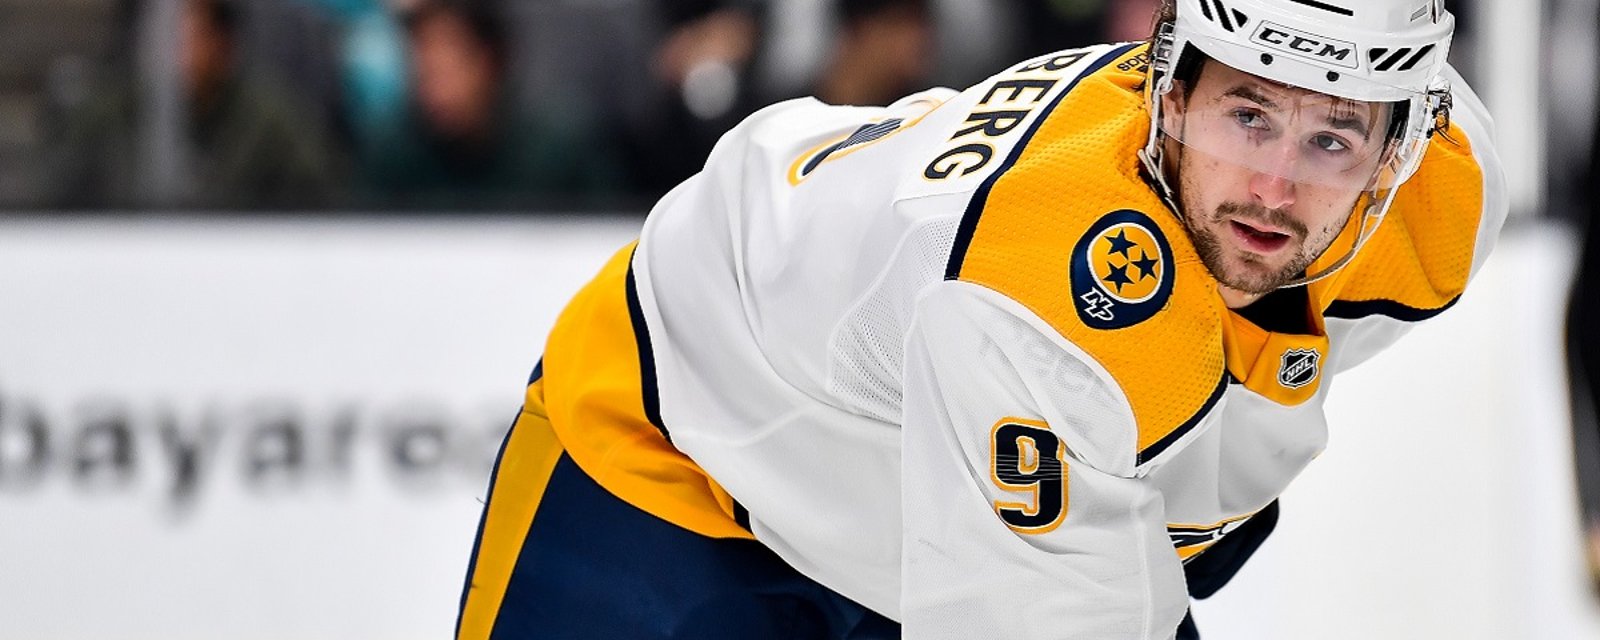 Rumor: A “good chance” Filip Forsberg is wearing another uniform before the end of the season.